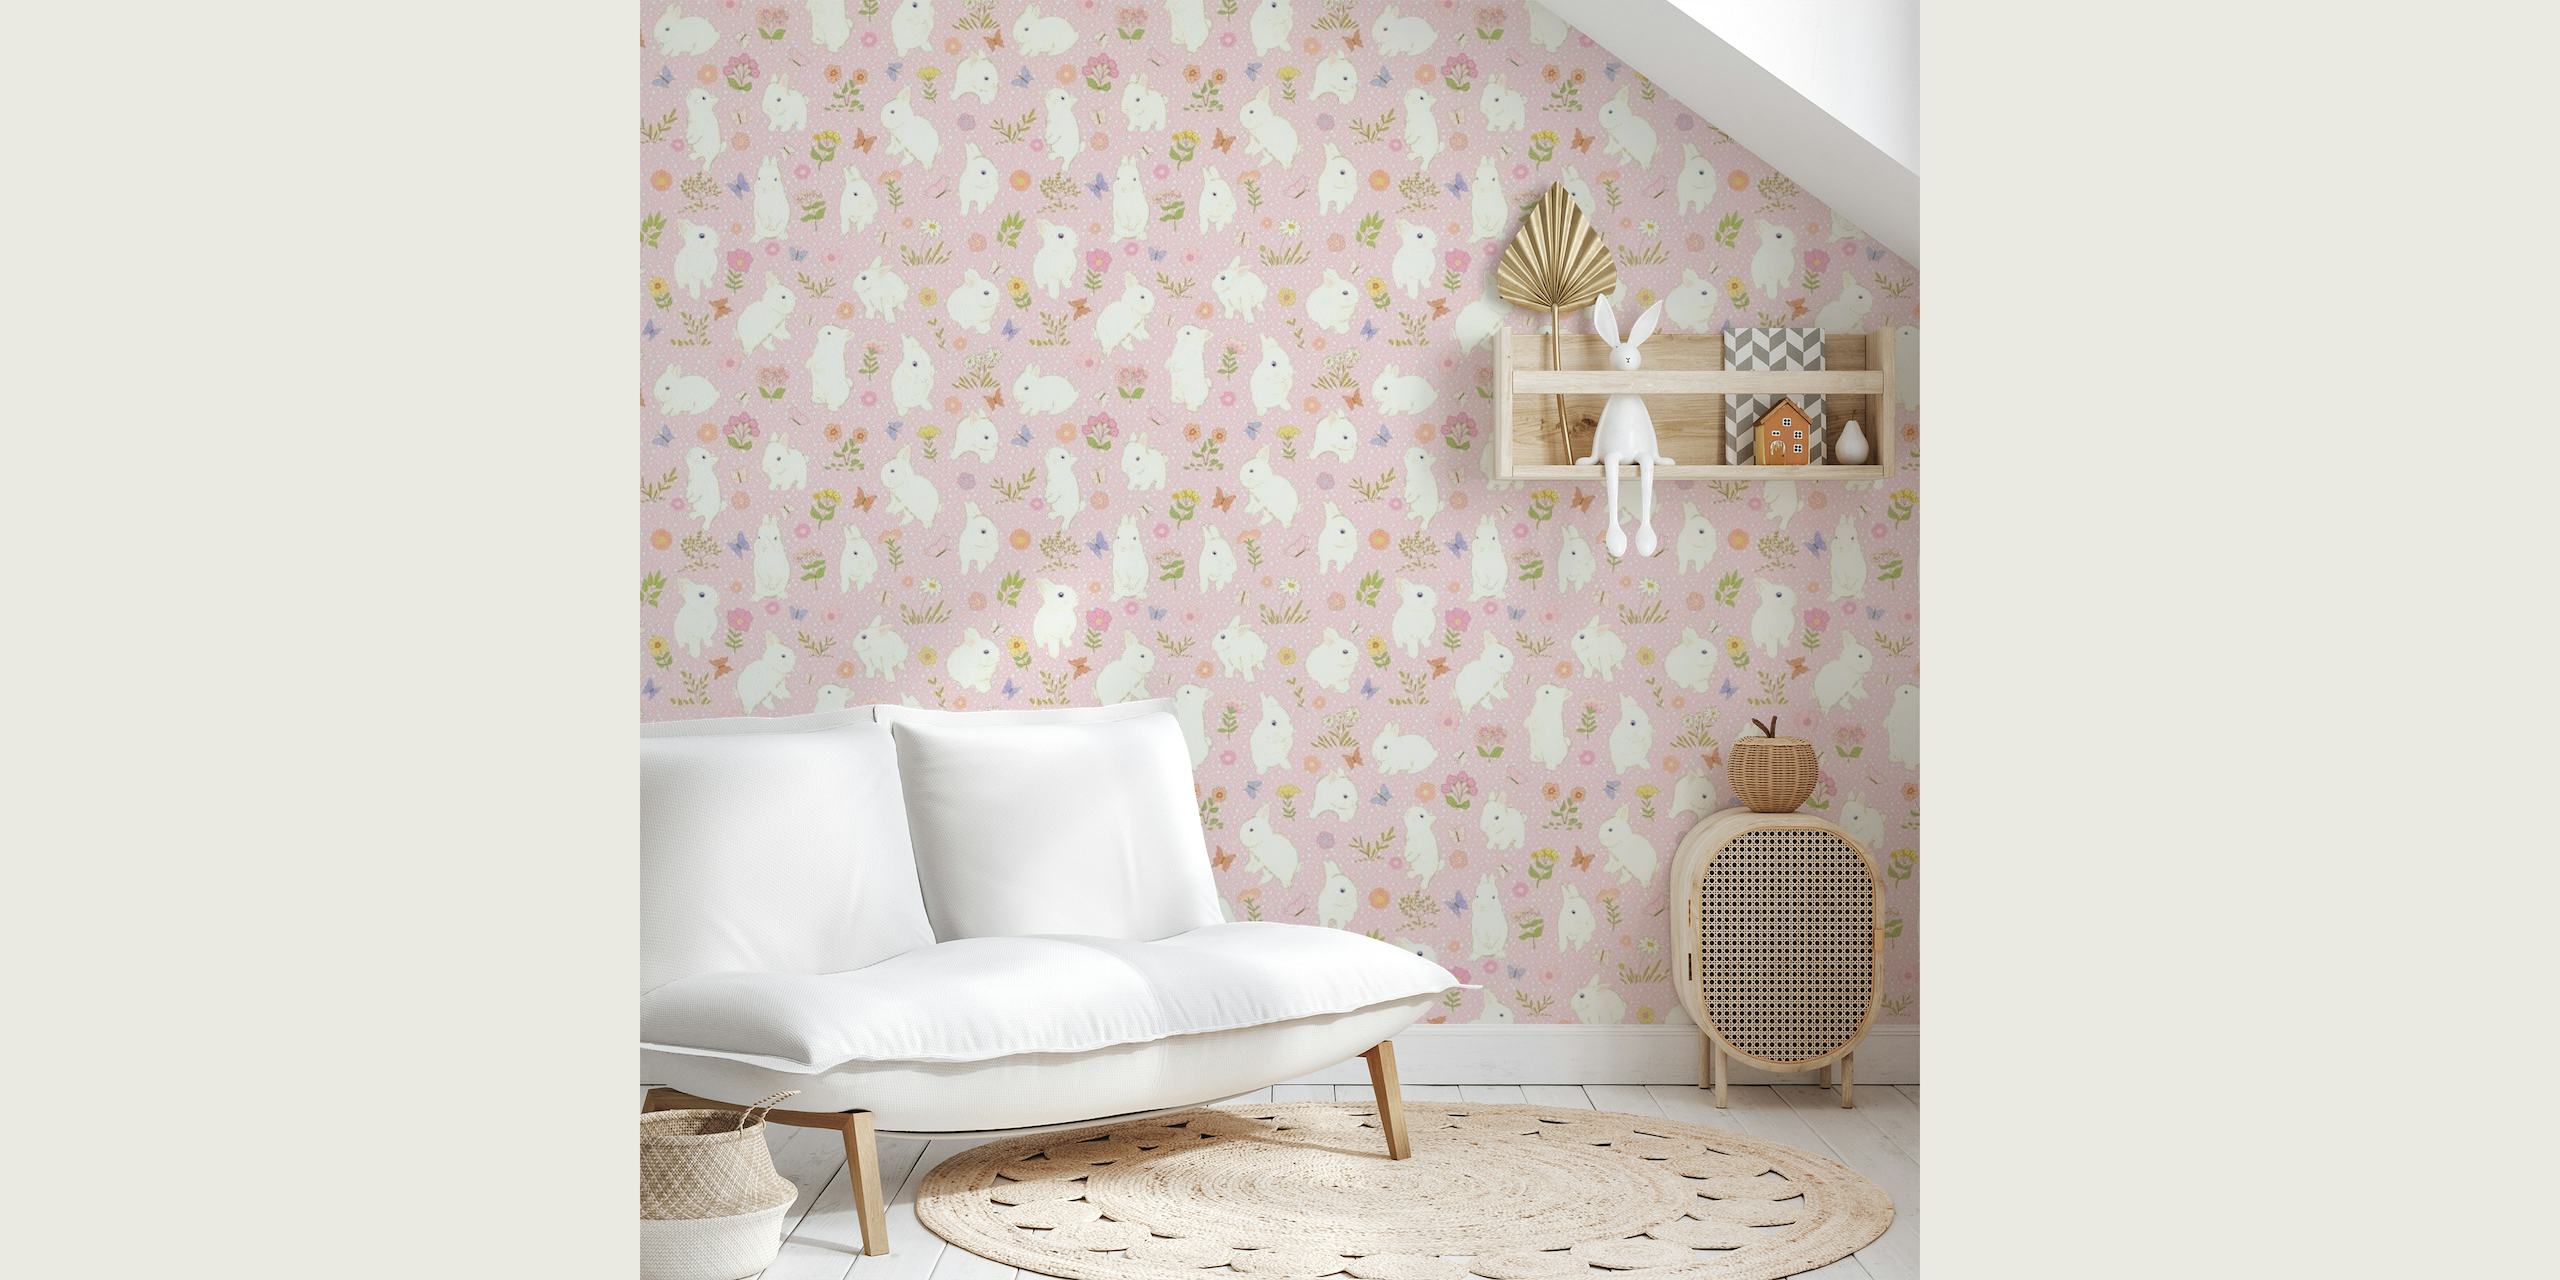 Cute white bunnies pattern on a pink background wall mural